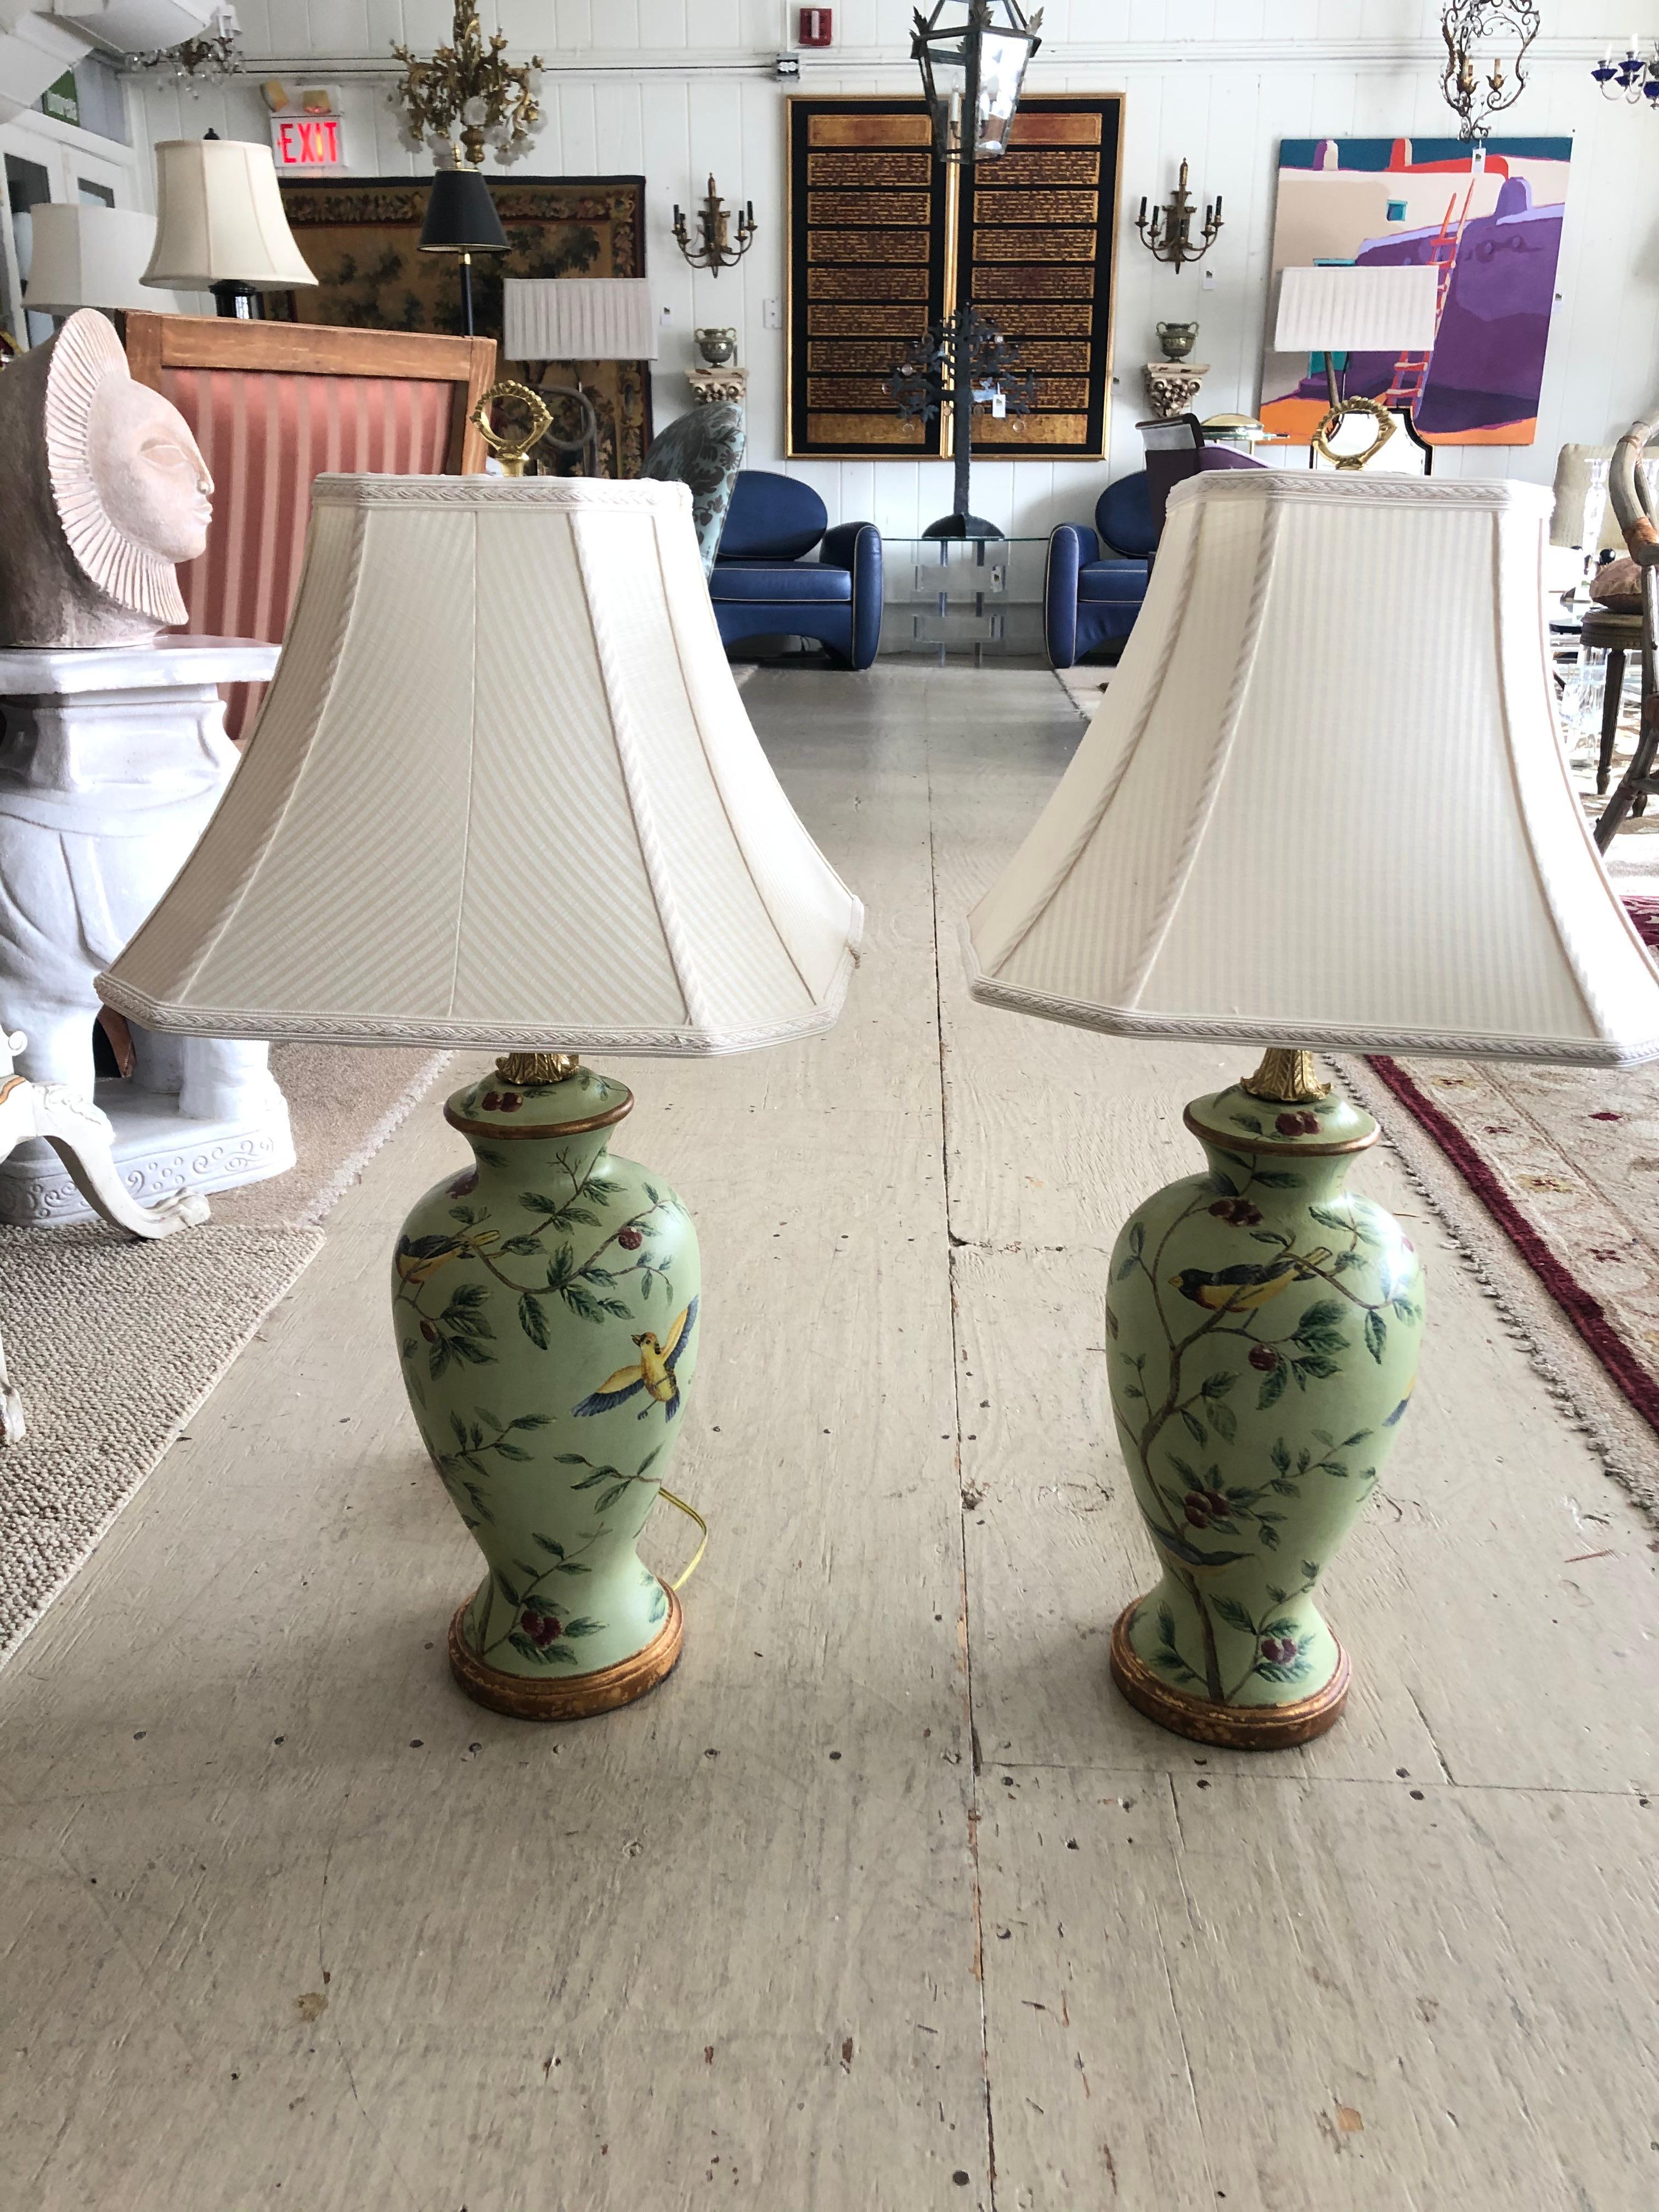 A beautiful pair of celadon green painted table lamps having birds and foliage, bronze gold details and very pretty finial. These Bradburn lamps retail for $900 each!
Lamp urns are 8